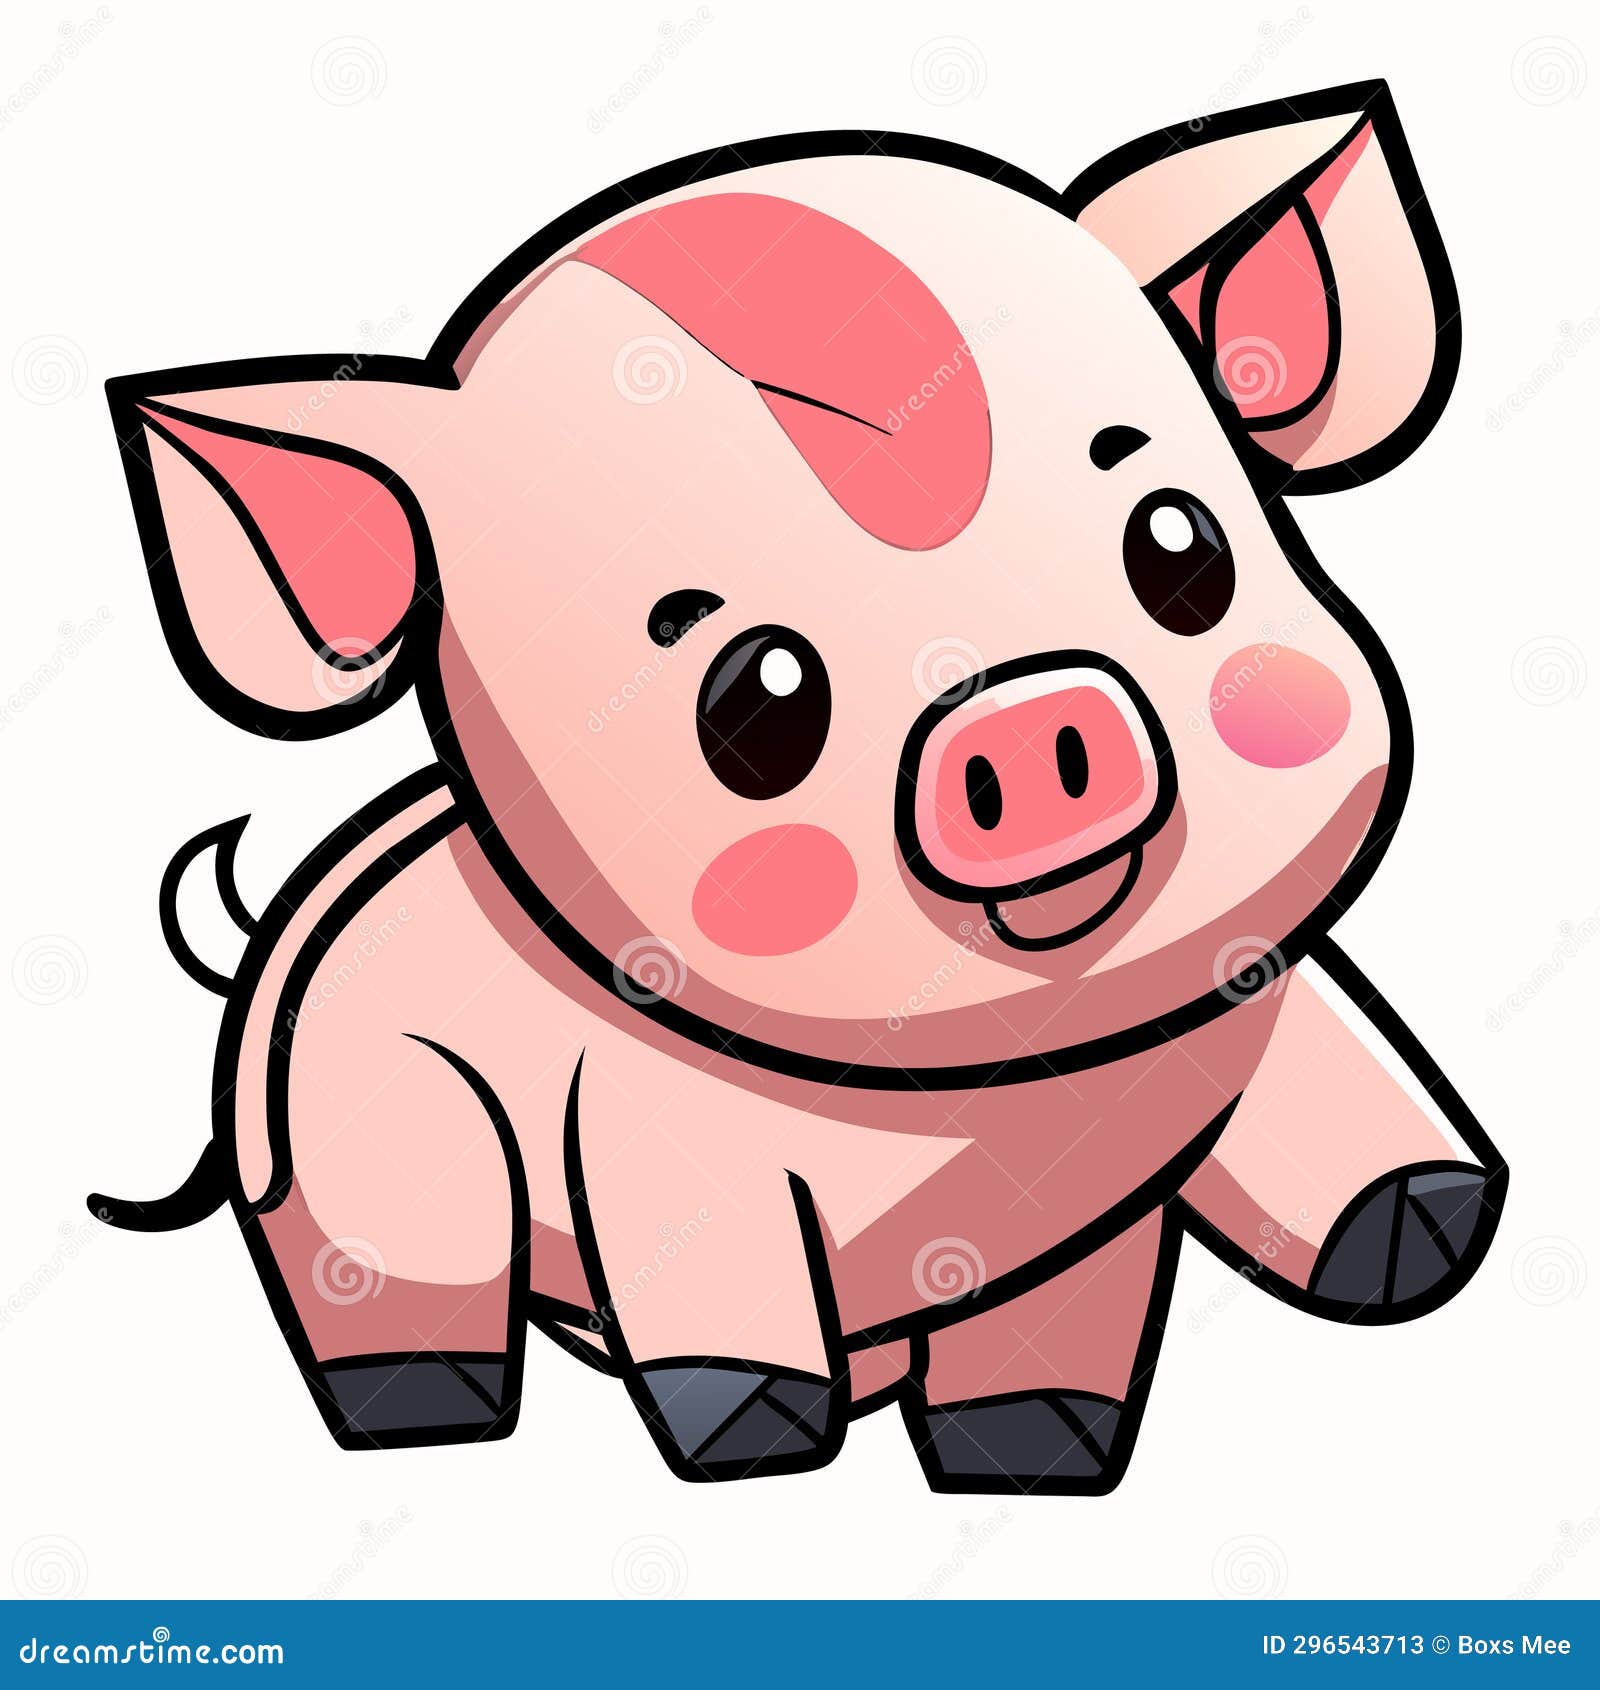 Cute Pig. Vector Illustration Isolated on a White Background. Cartoon ...